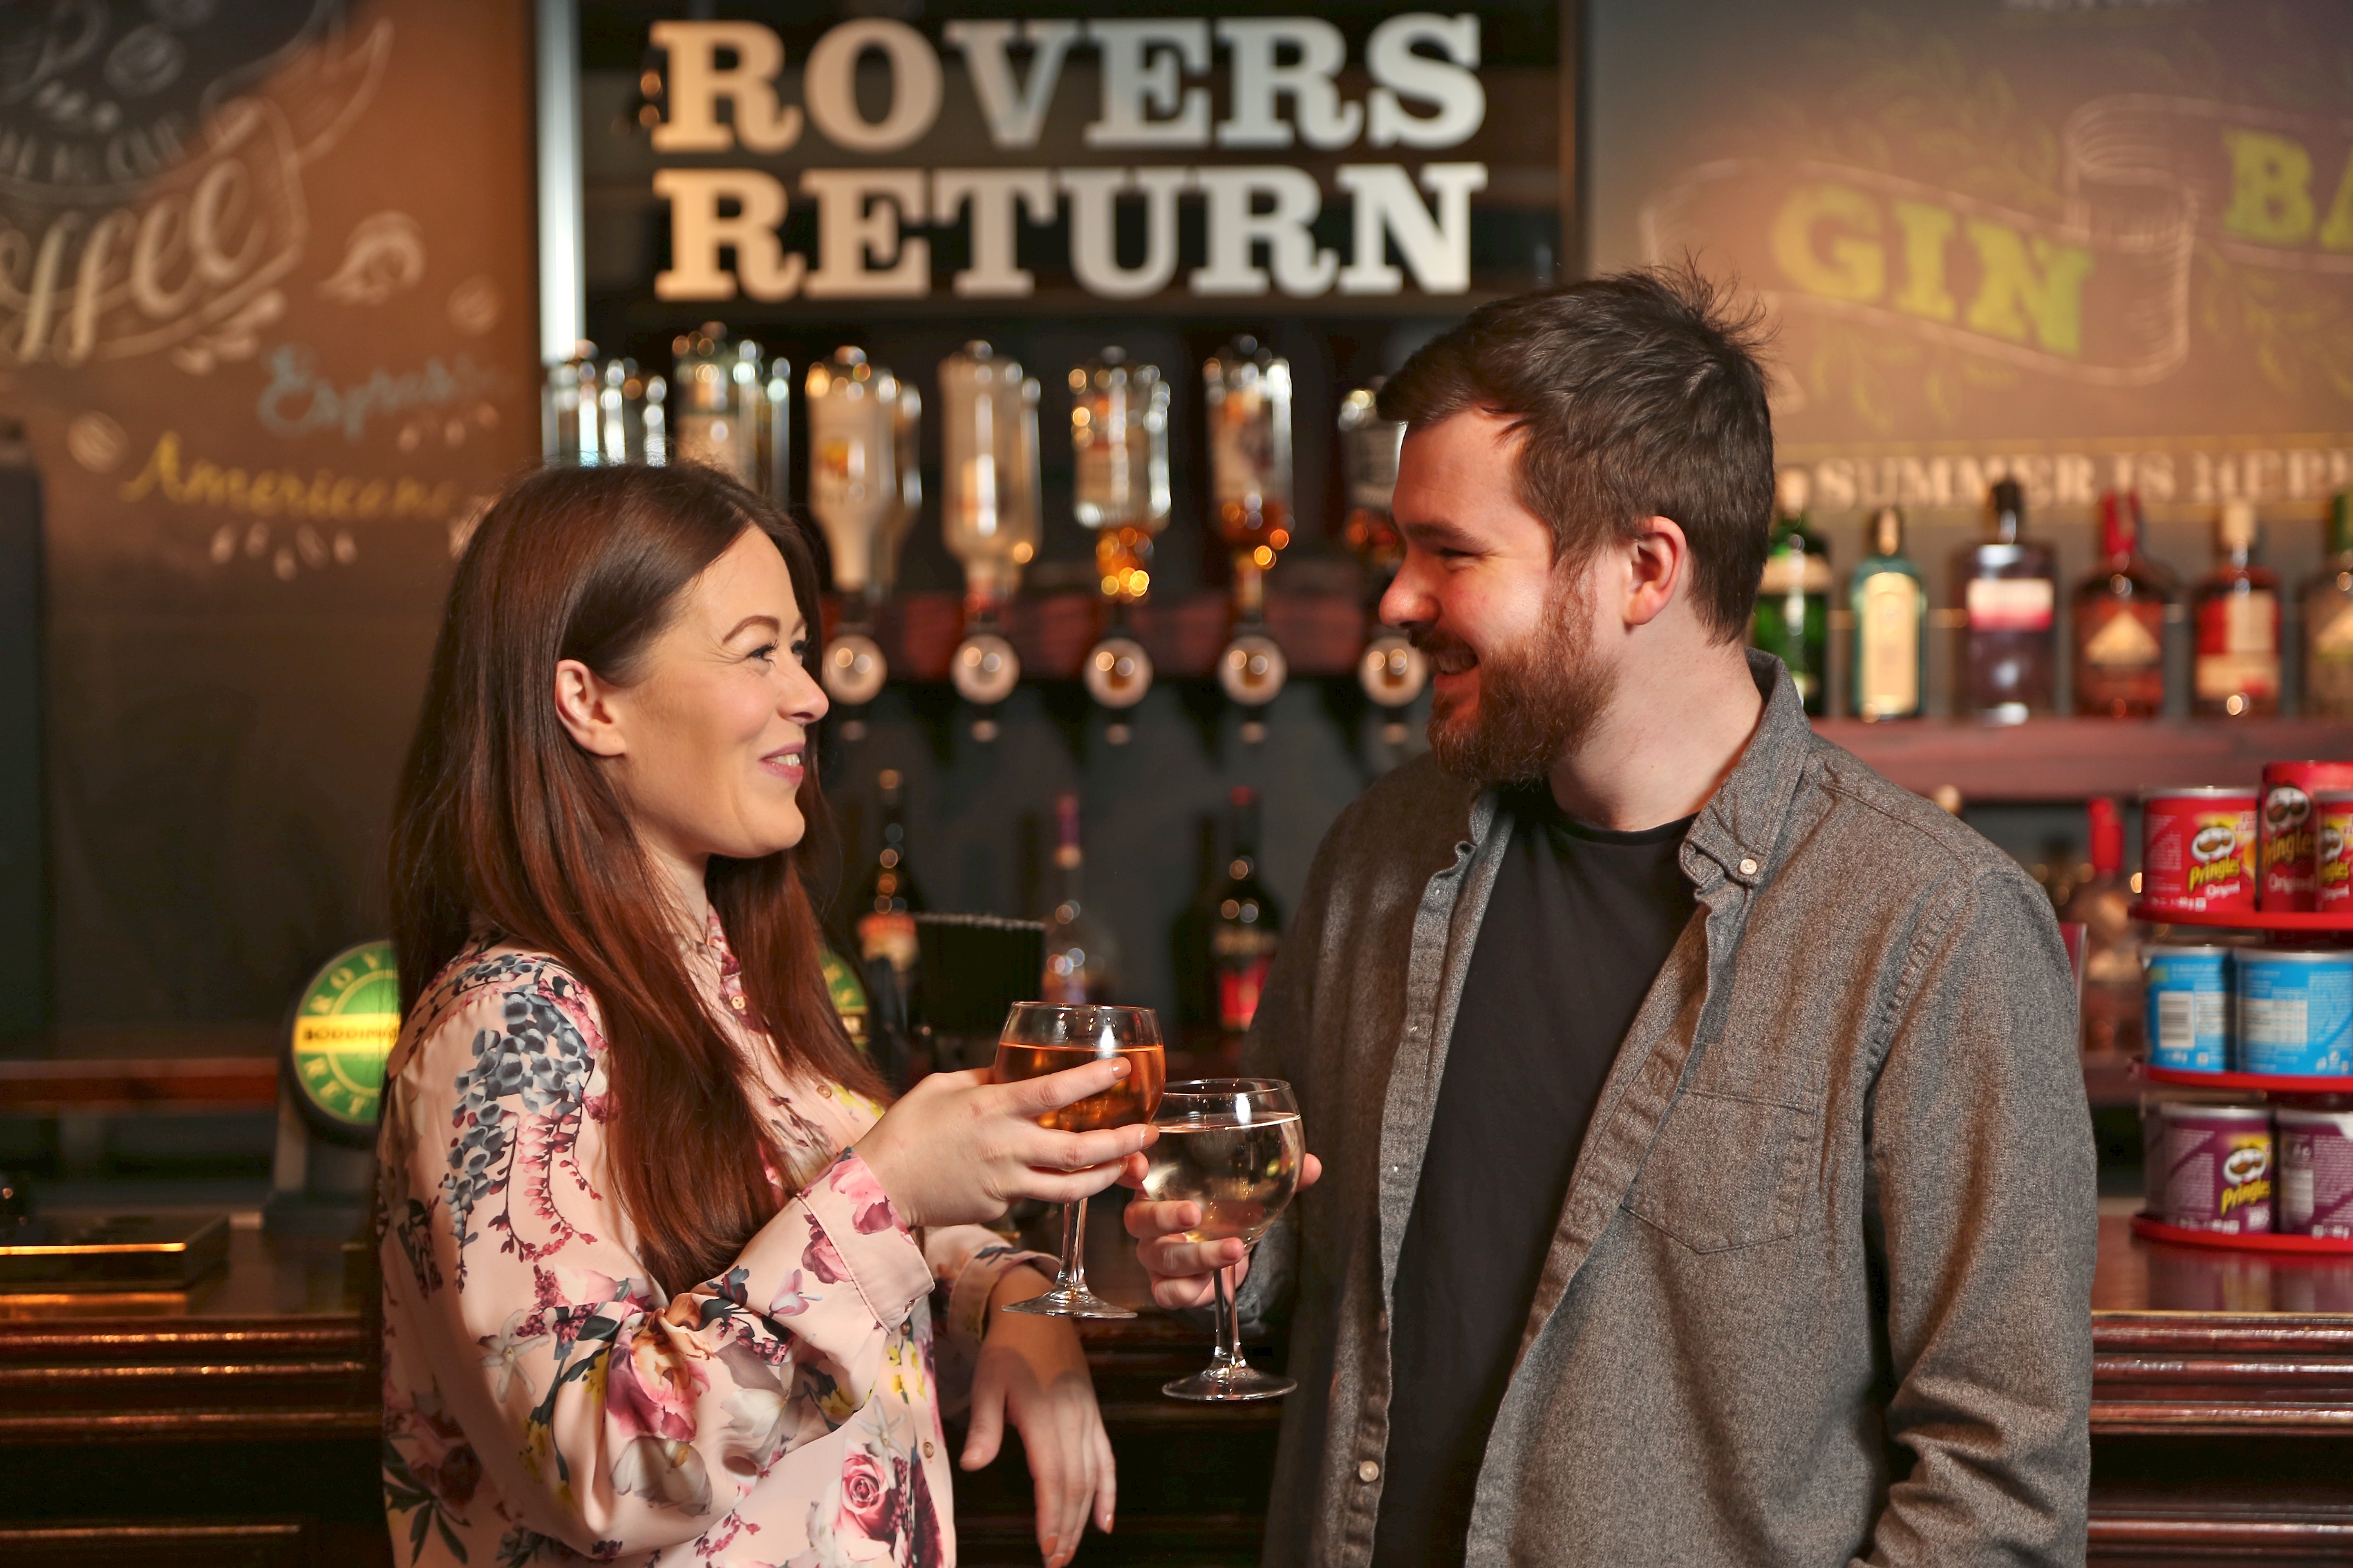 Guests enjoying a drink at the Rovers Return bar in Madame Tussauds Blackpool